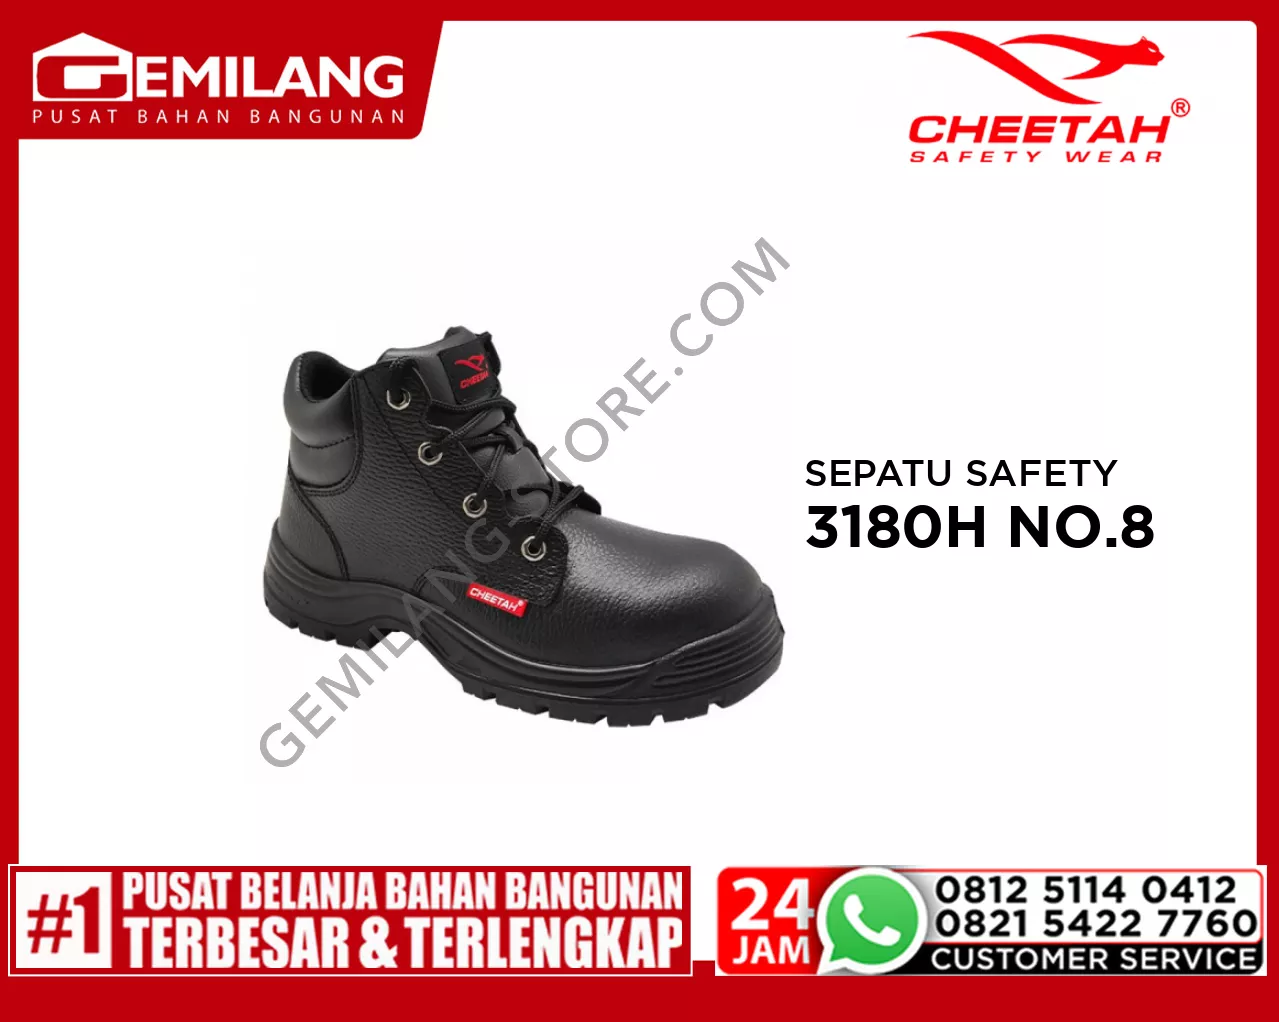 CHEETAH SEPATU SAFETY 3180H MID CUT LACE UP BOOTS NO.8